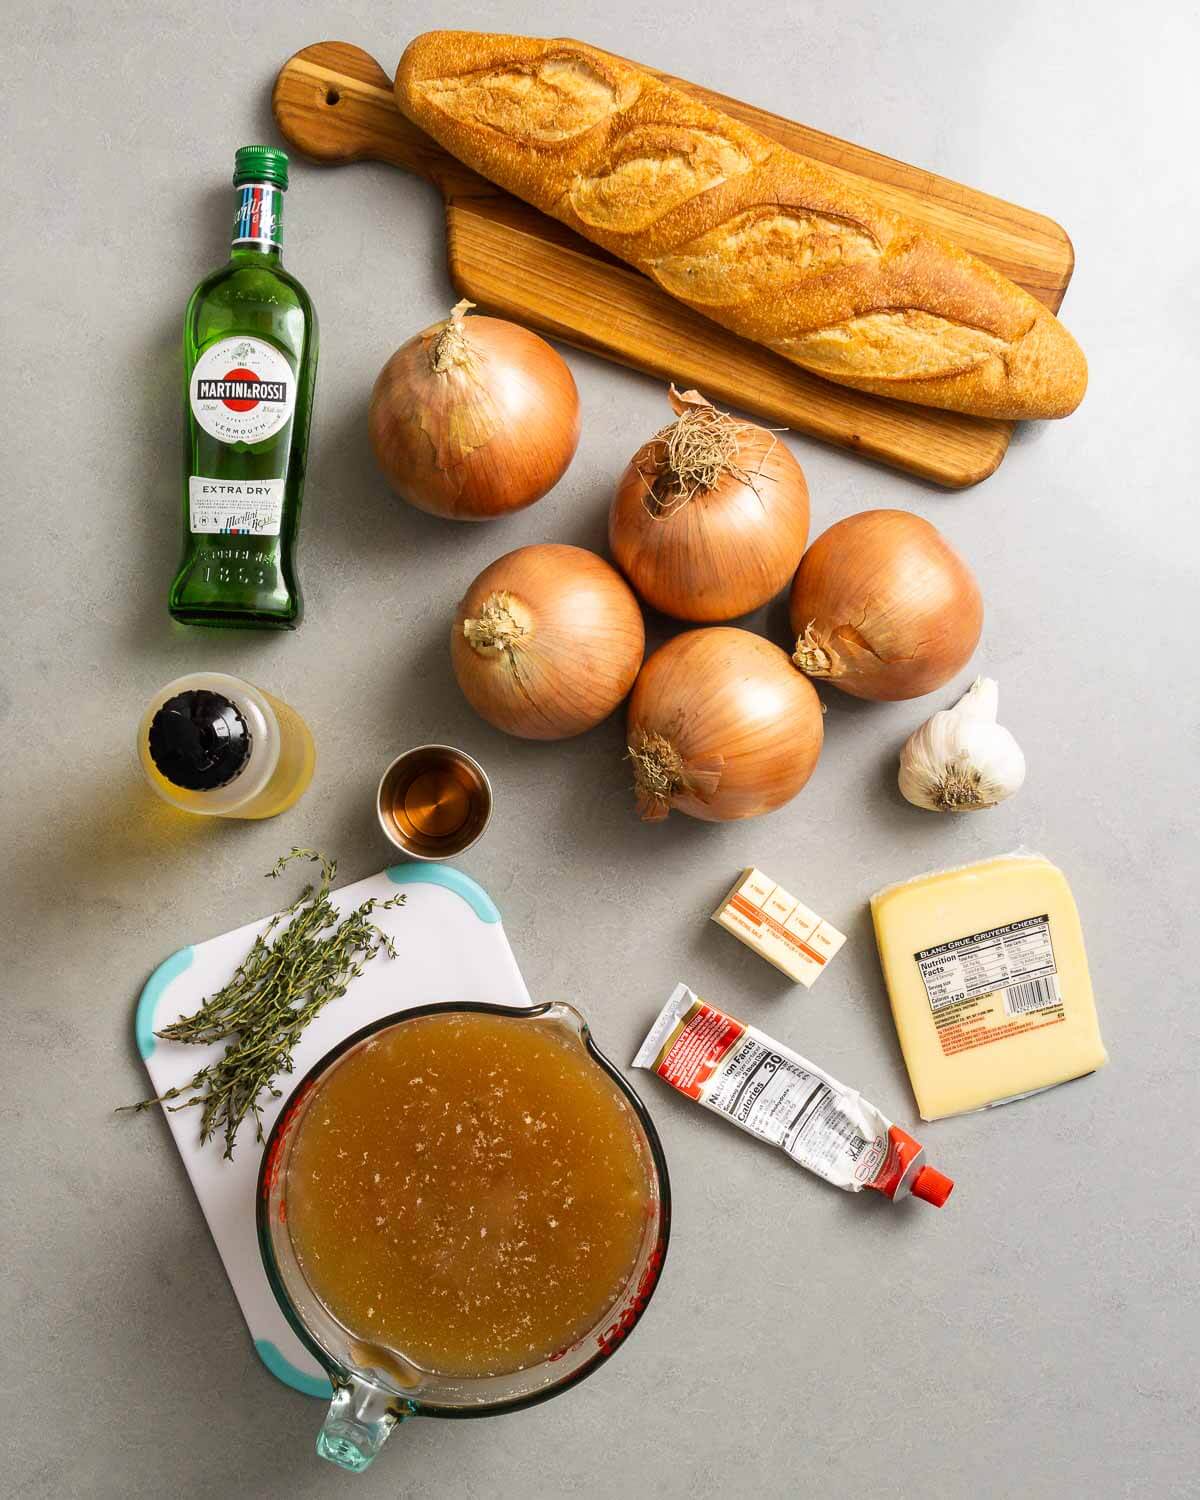 Ingredients shown: vermouth, baguette, onions, olive oil, brandy, butter, garlic, tomato paste, gruyere cheese, thyme, and beef stock.